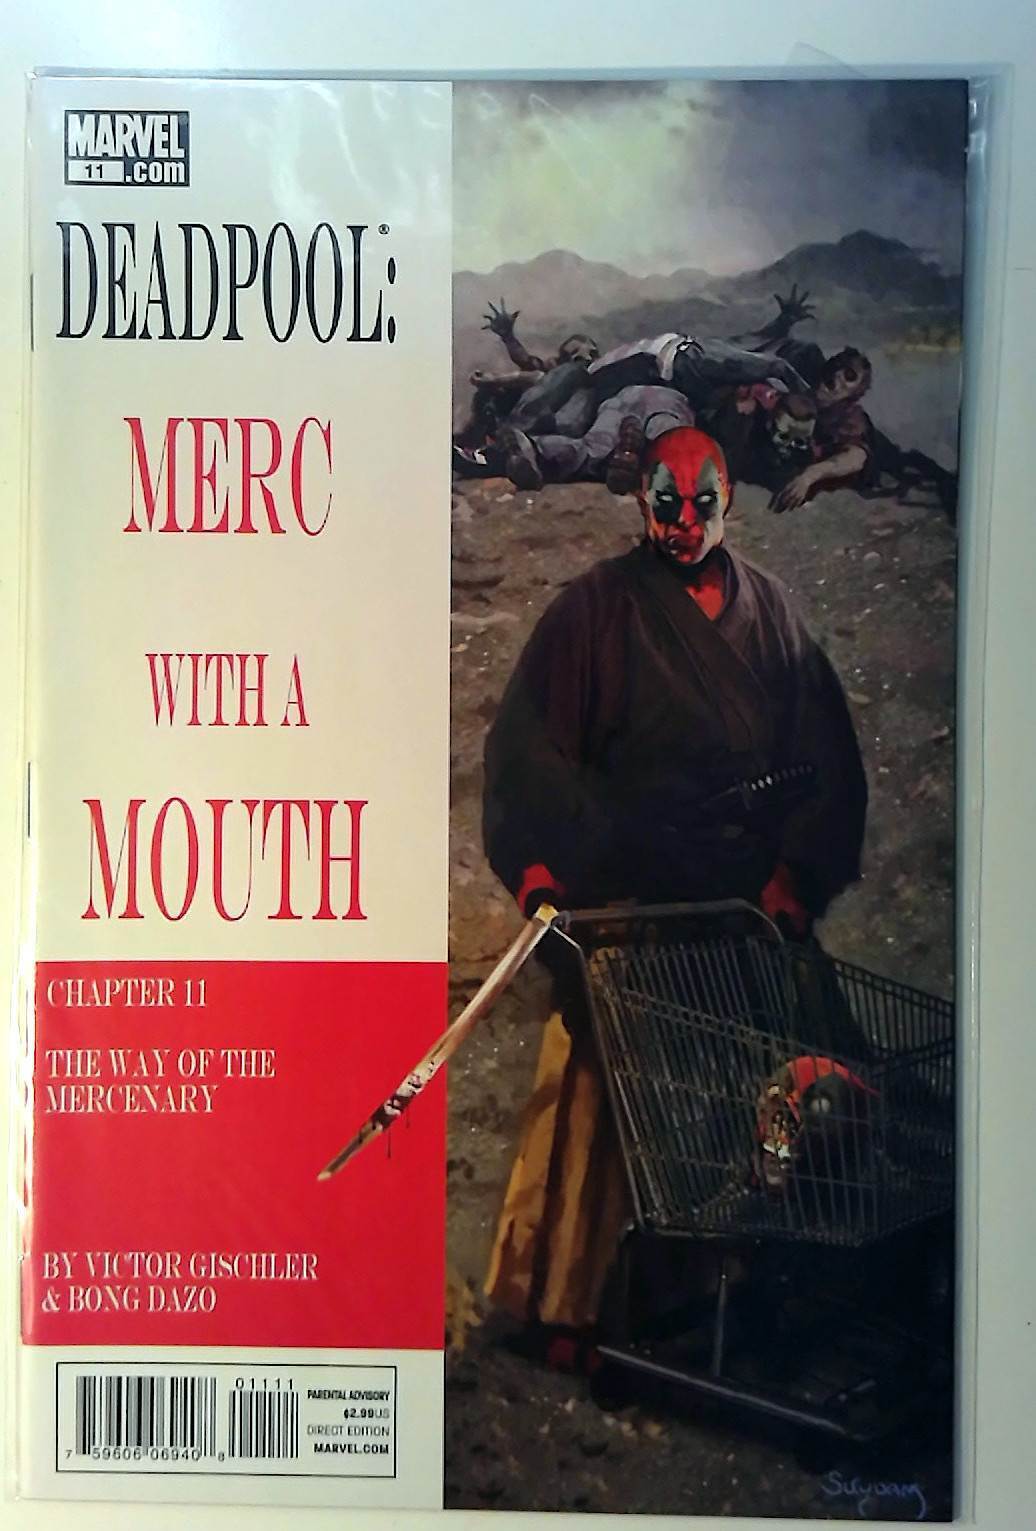 Deadpool: Merc With a Mouth #11 Marvel (2010) NM- 1st Print Comic Book